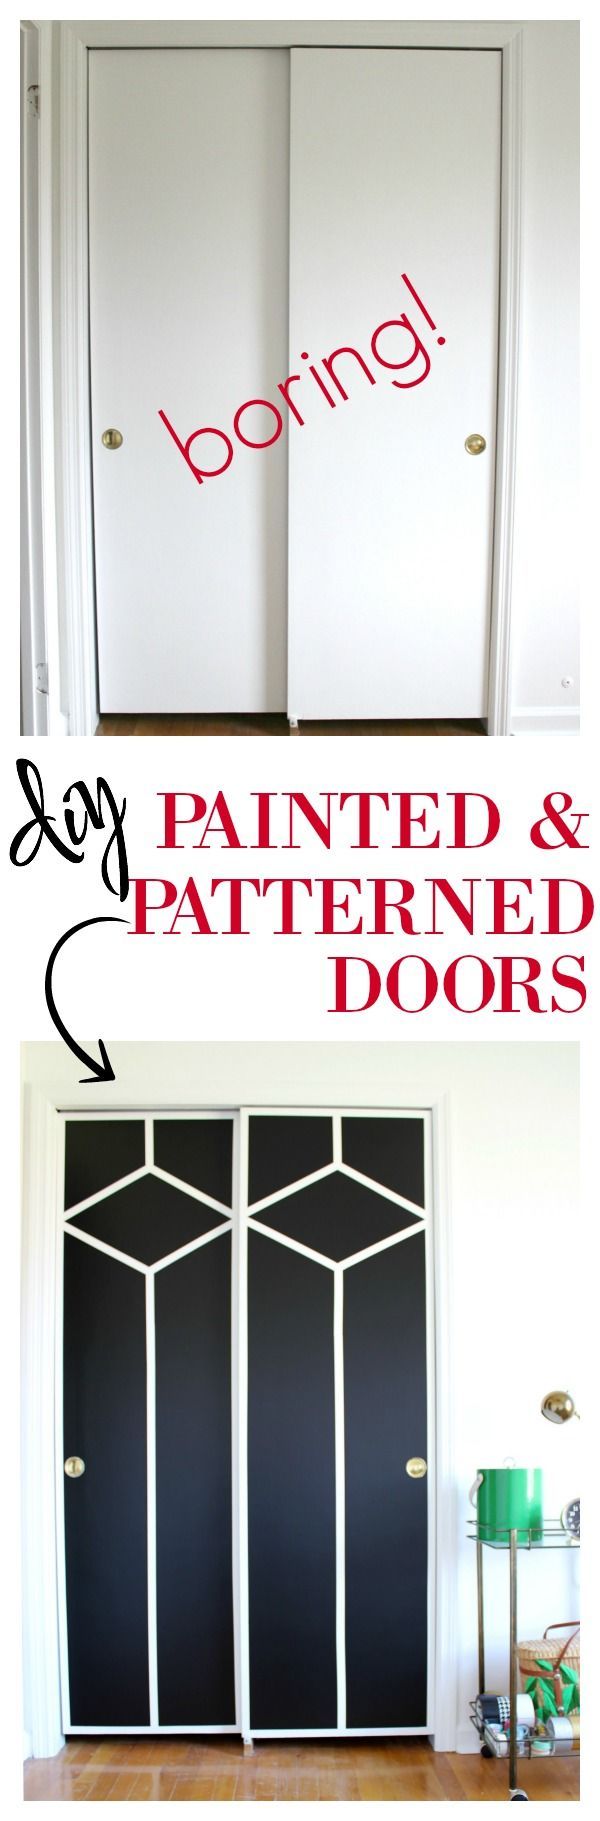 DIY Painted and Patterned Doors